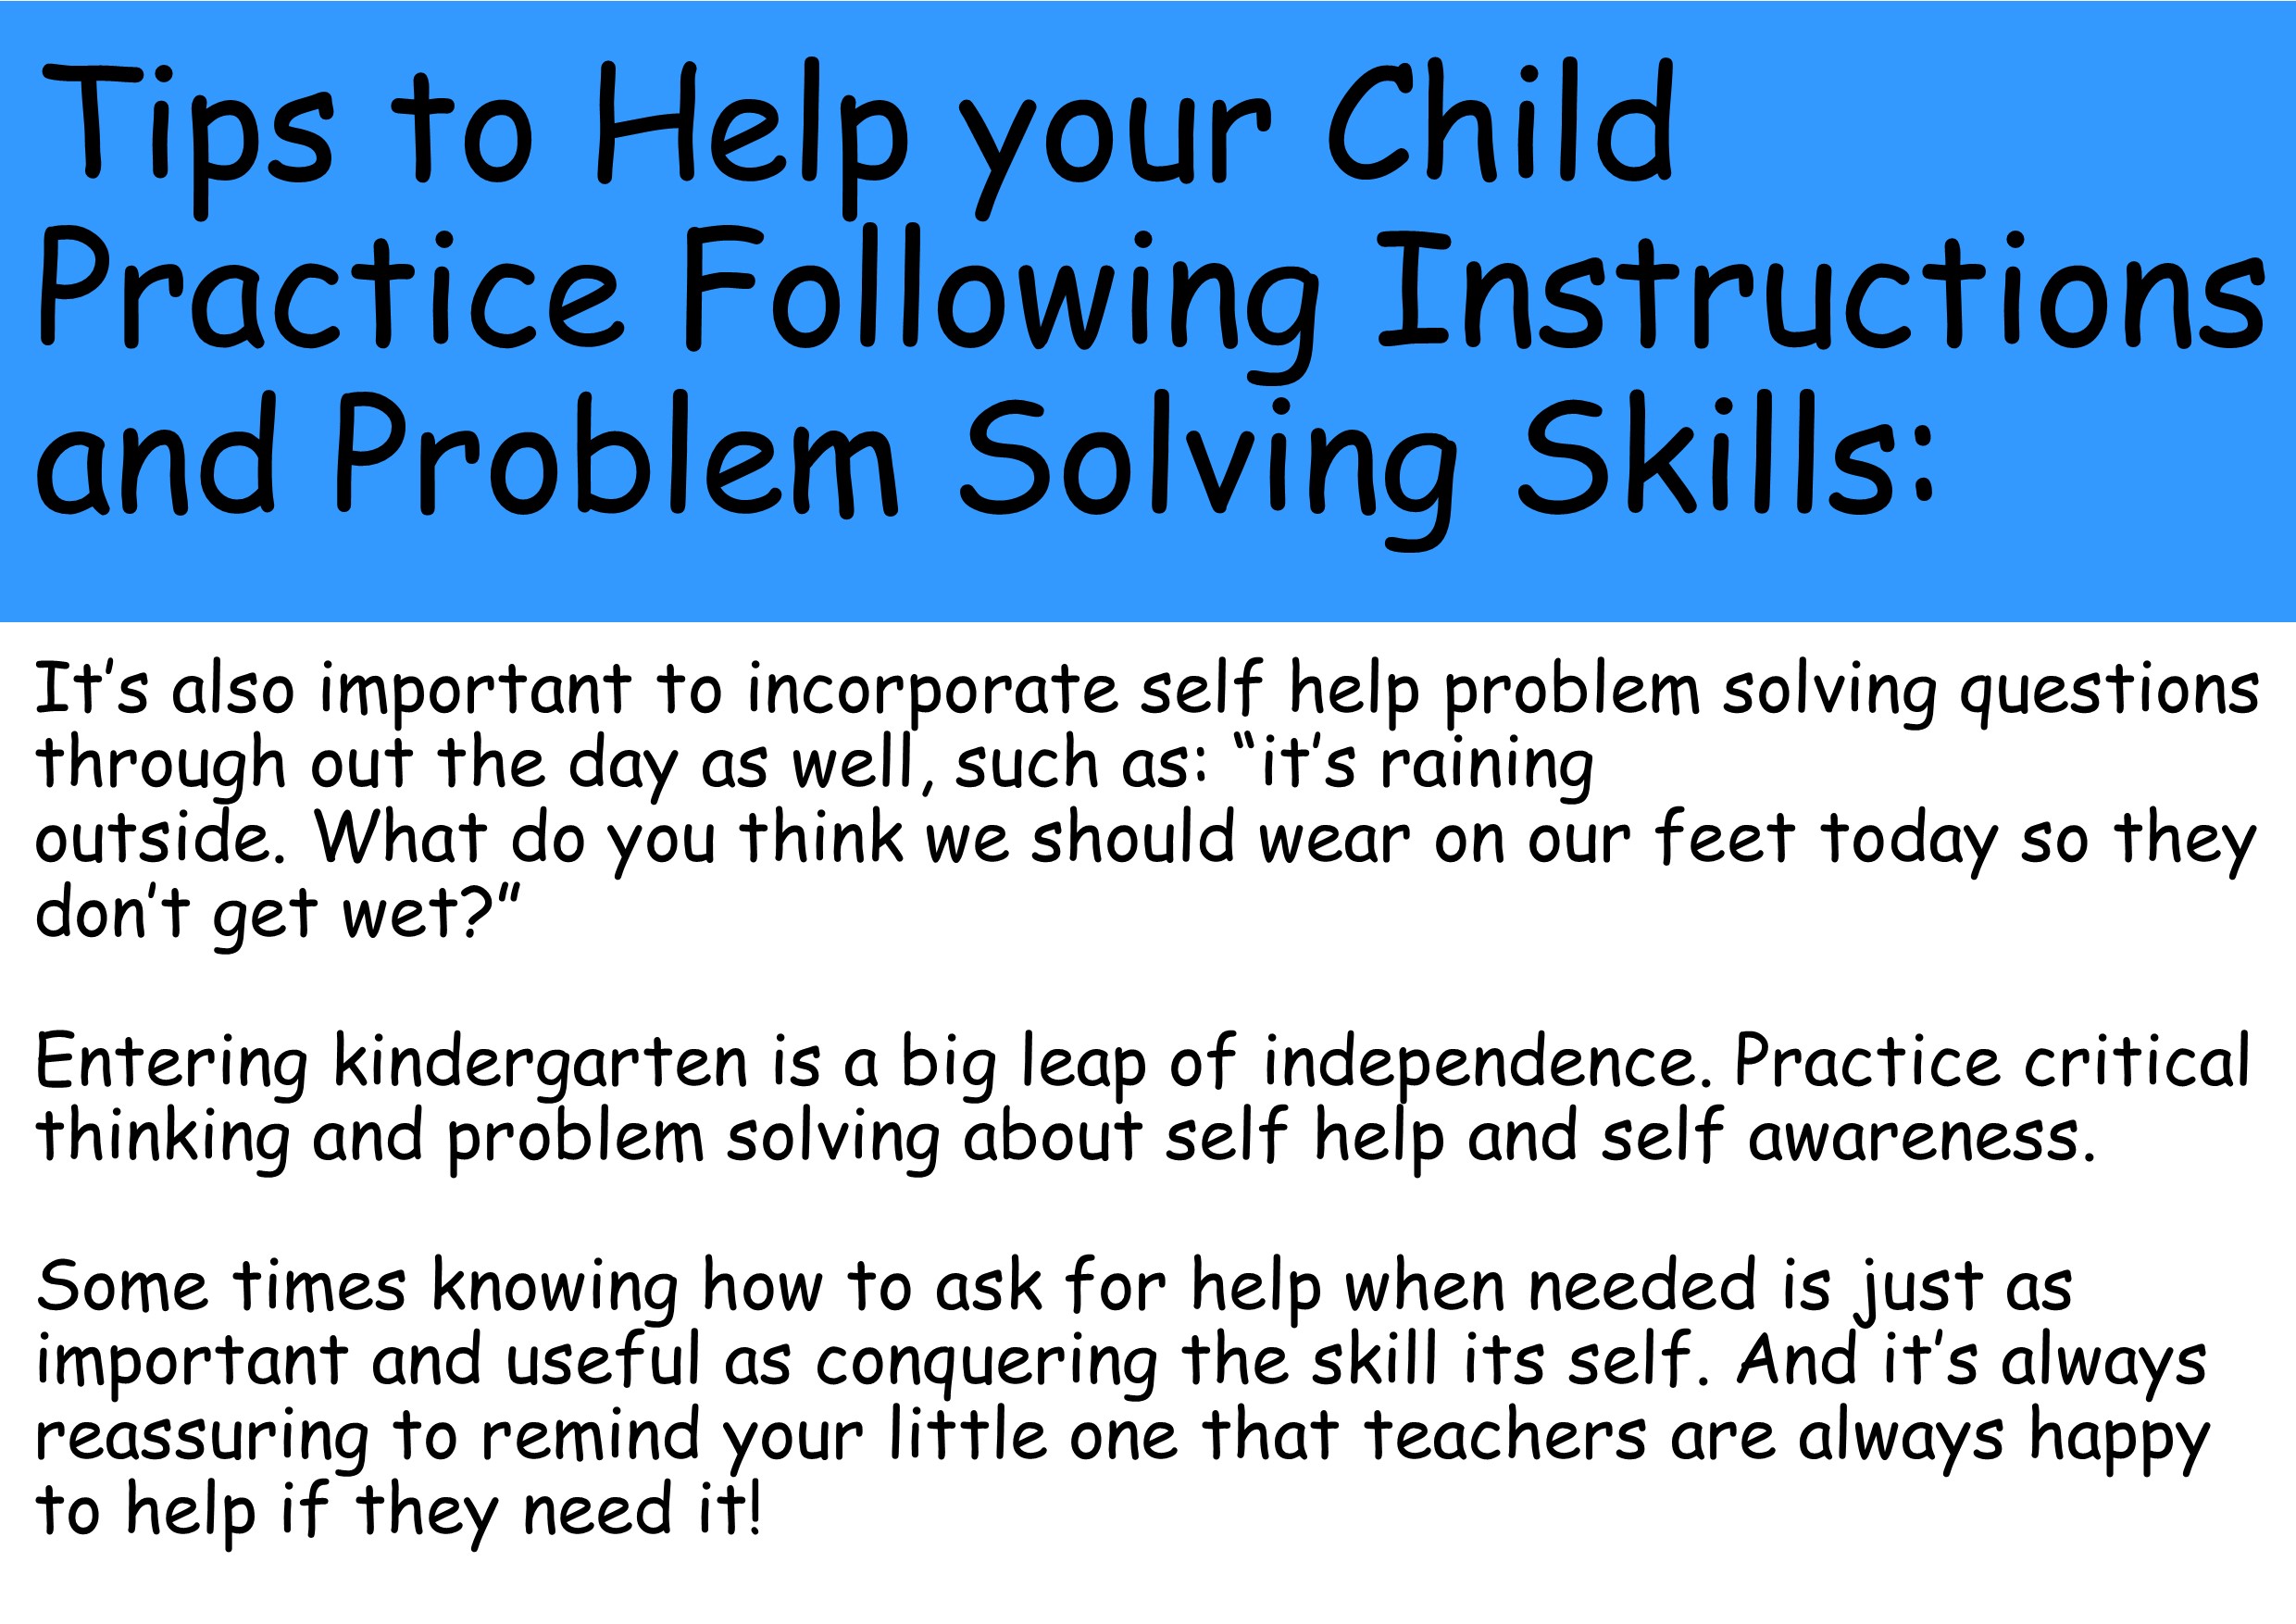 Tips to help your child practice following instructions and problem solving skills 